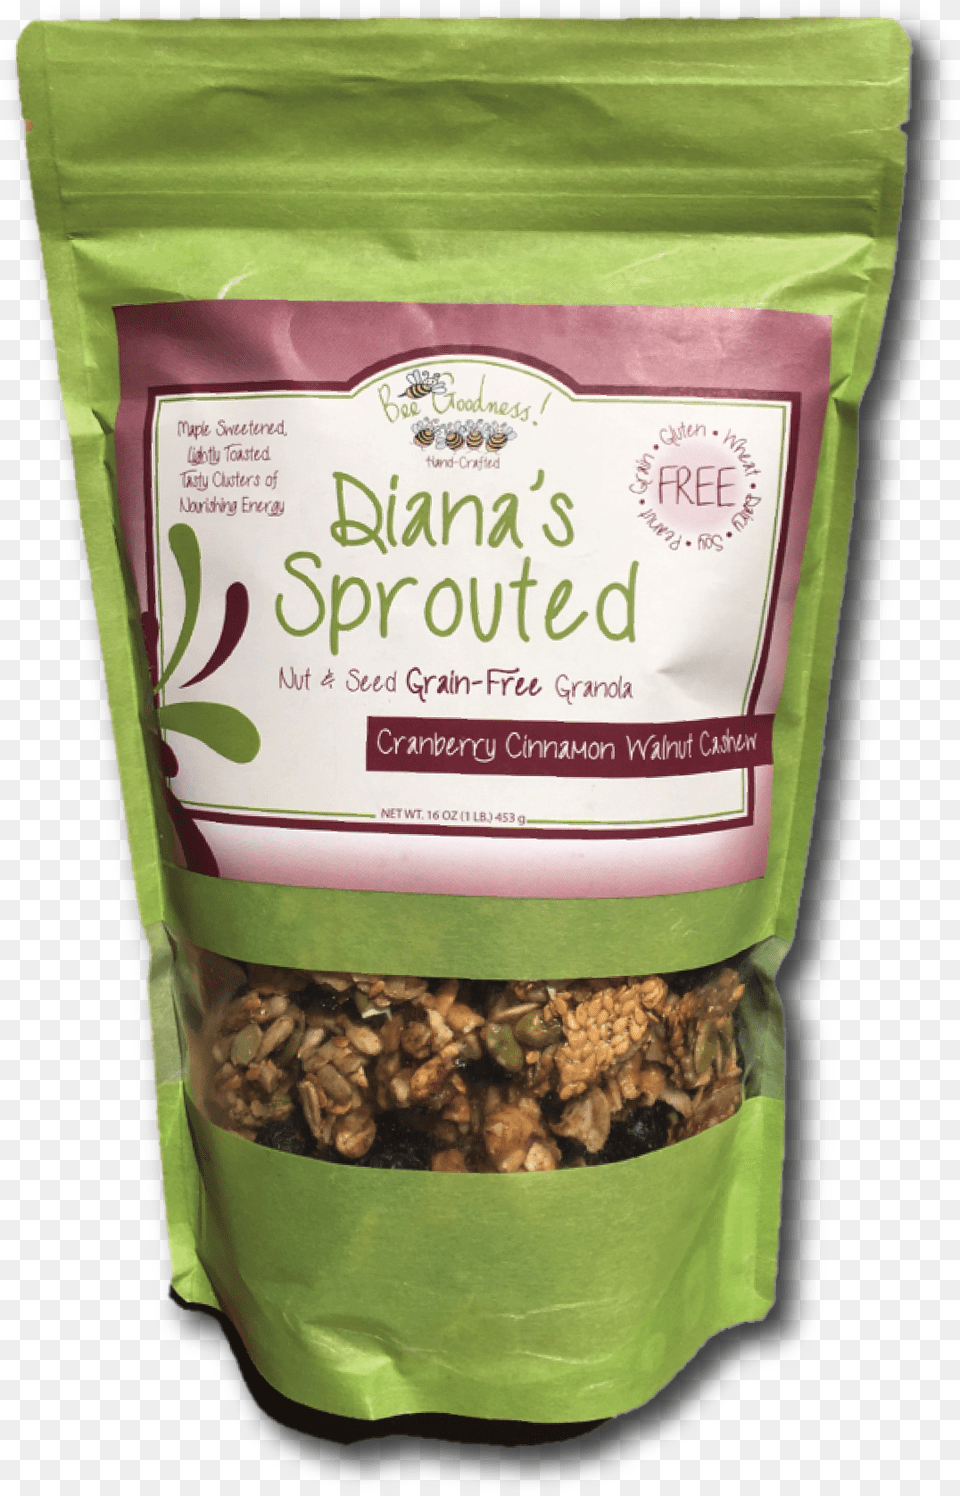 Buy Sprouted Cranberry Cinnamon Walnut Walnut, Food, Grain, Granola, Produce Free Png Download